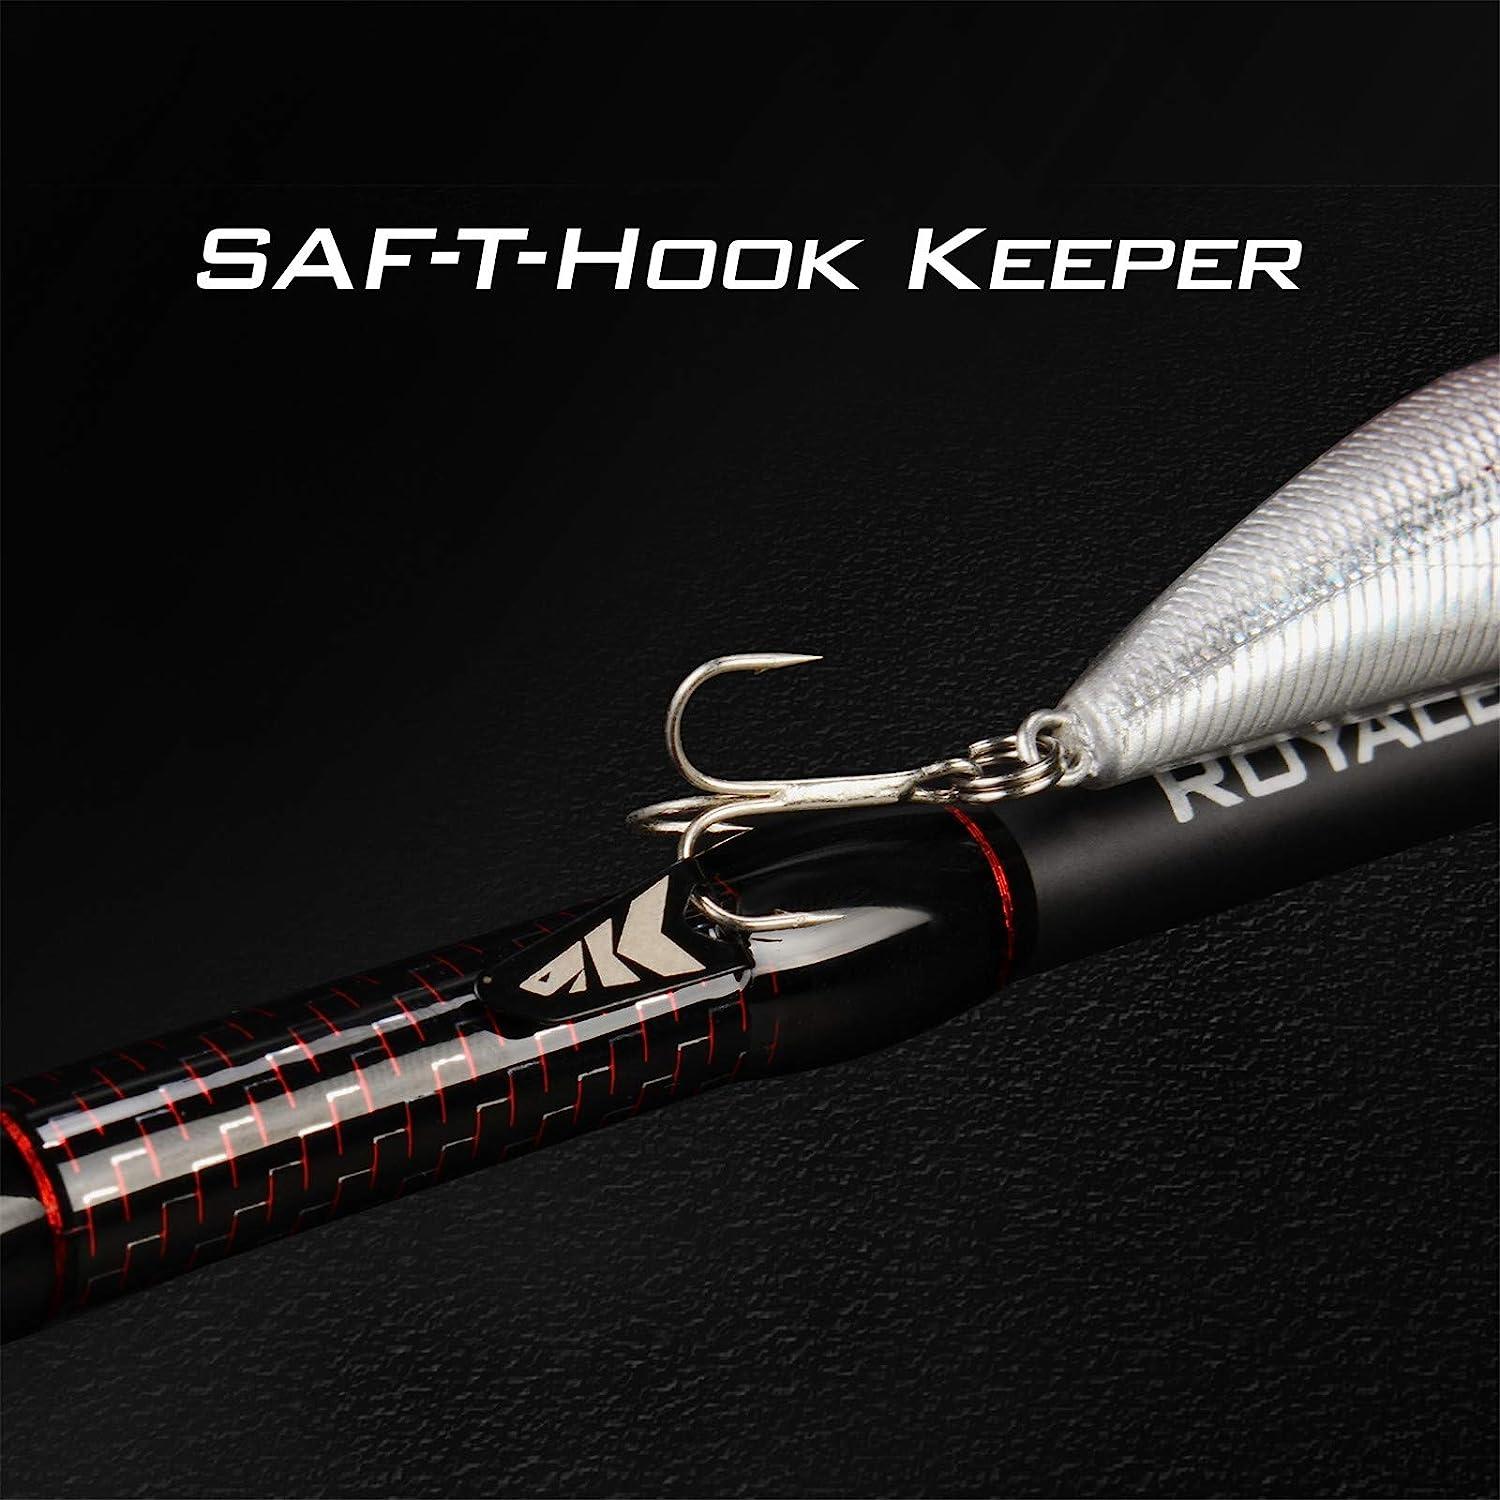 KastKing Royale Select Fishing Rods, Casting Models Designed for Bass  Fishing Techniques,1 & 2-pc Fishing Rods for Fresh & Saltwater,Tournament  Quality & Performance, Premium Fuji Components D: Casting 7'0-mh  Power-fast-1pc